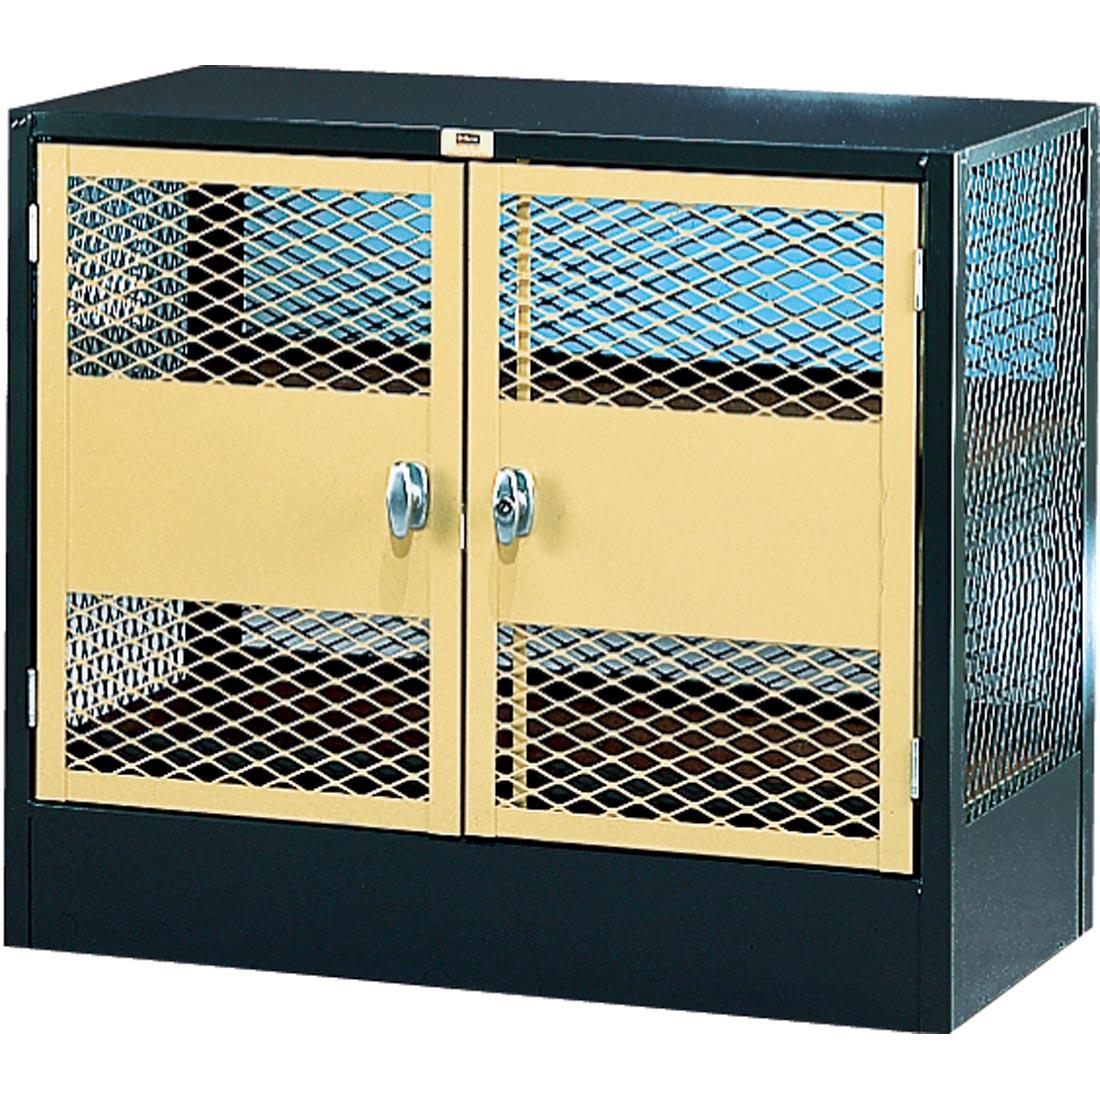 Debcor Small Drying Cabinet with Steel Mesh Walls